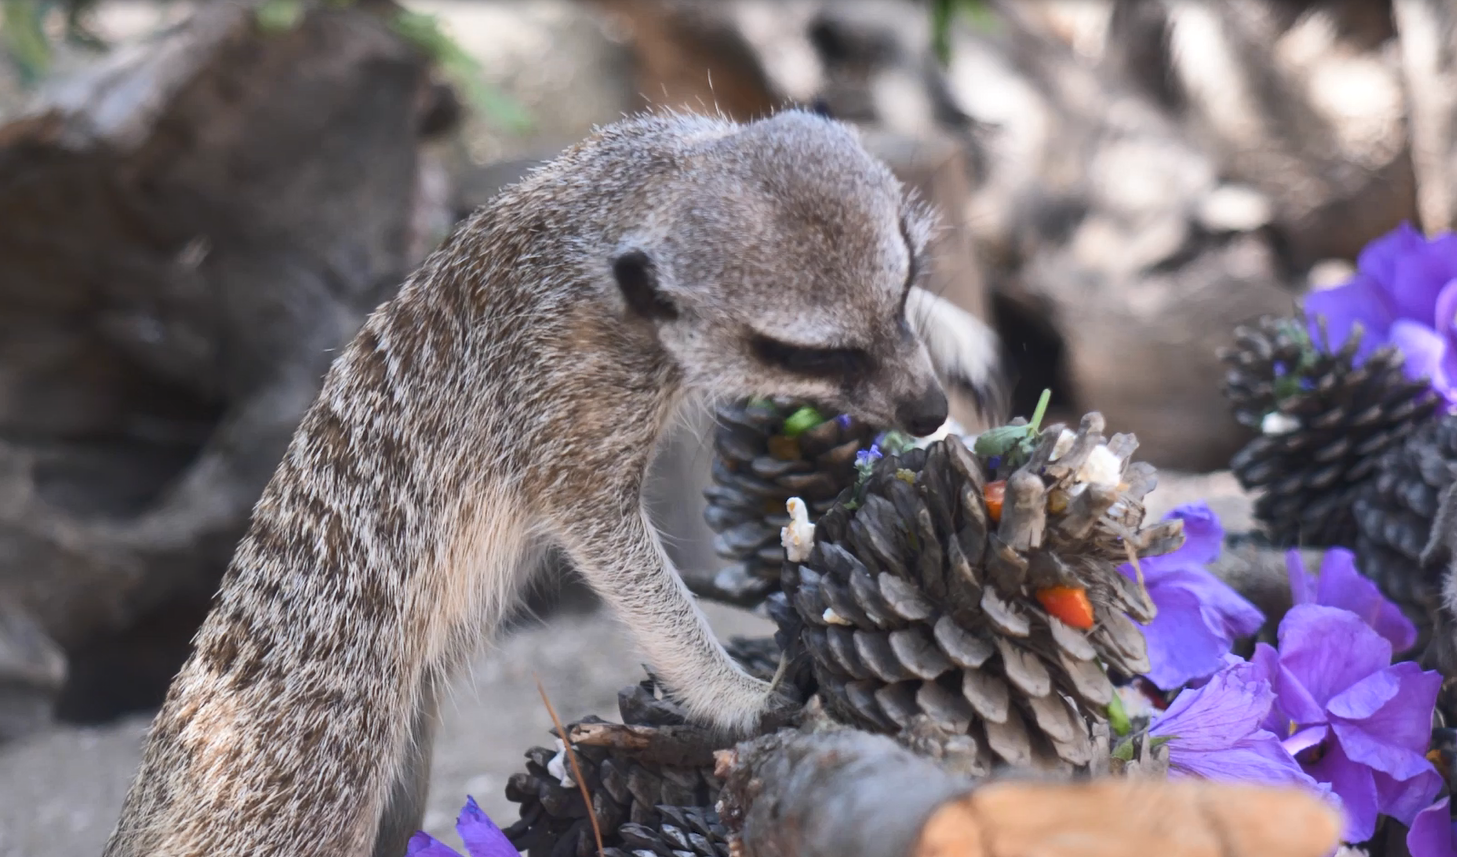 Slender-tailed meerkat forages for food from pinecone enrichment